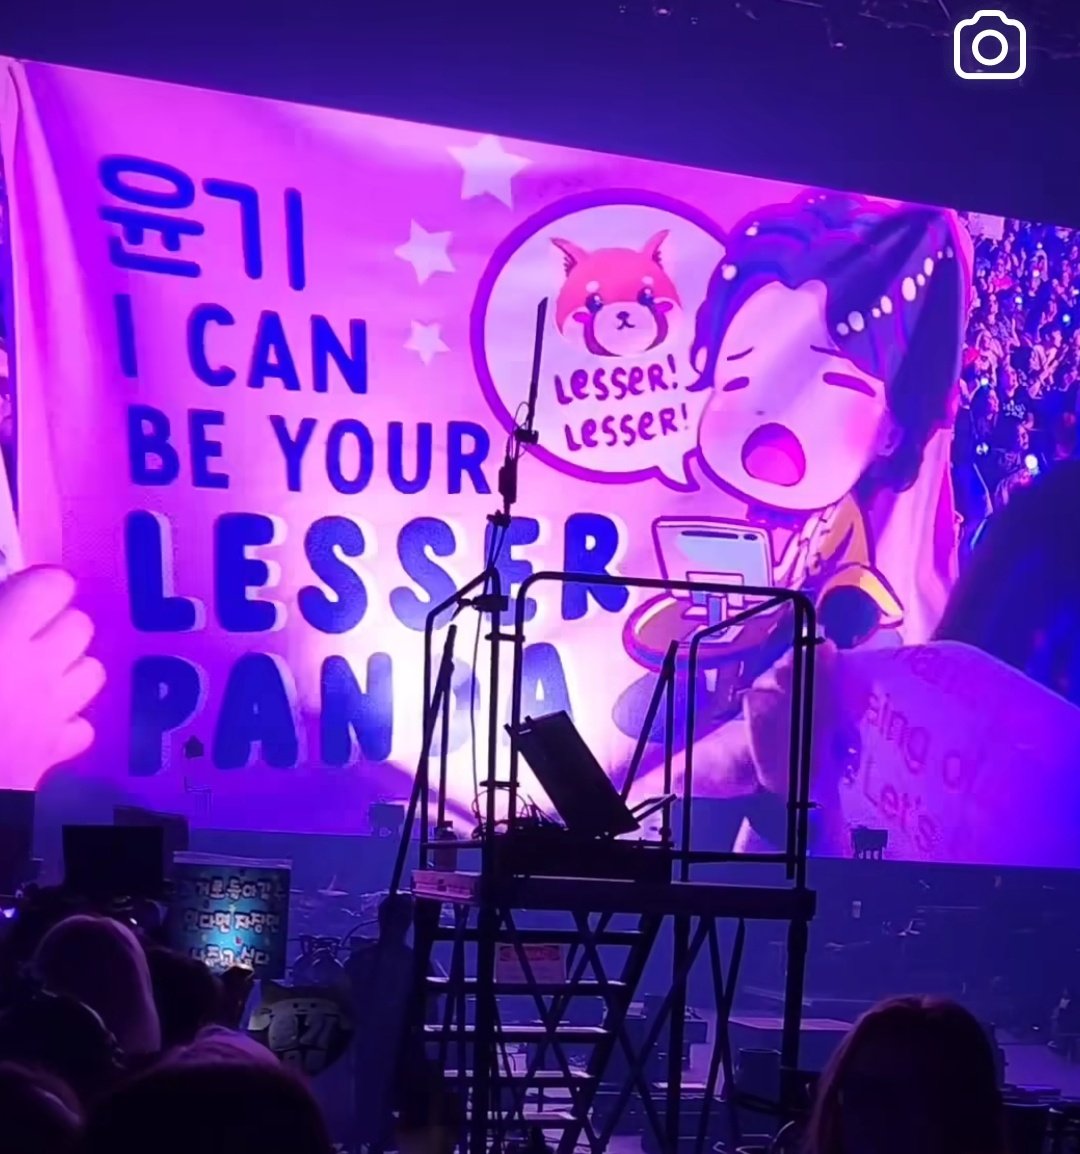 So you're telling me someone brought an 'I can be your lesser panda' slogan to Yoongi's concert and I had to learn it AGES later through Instagram??